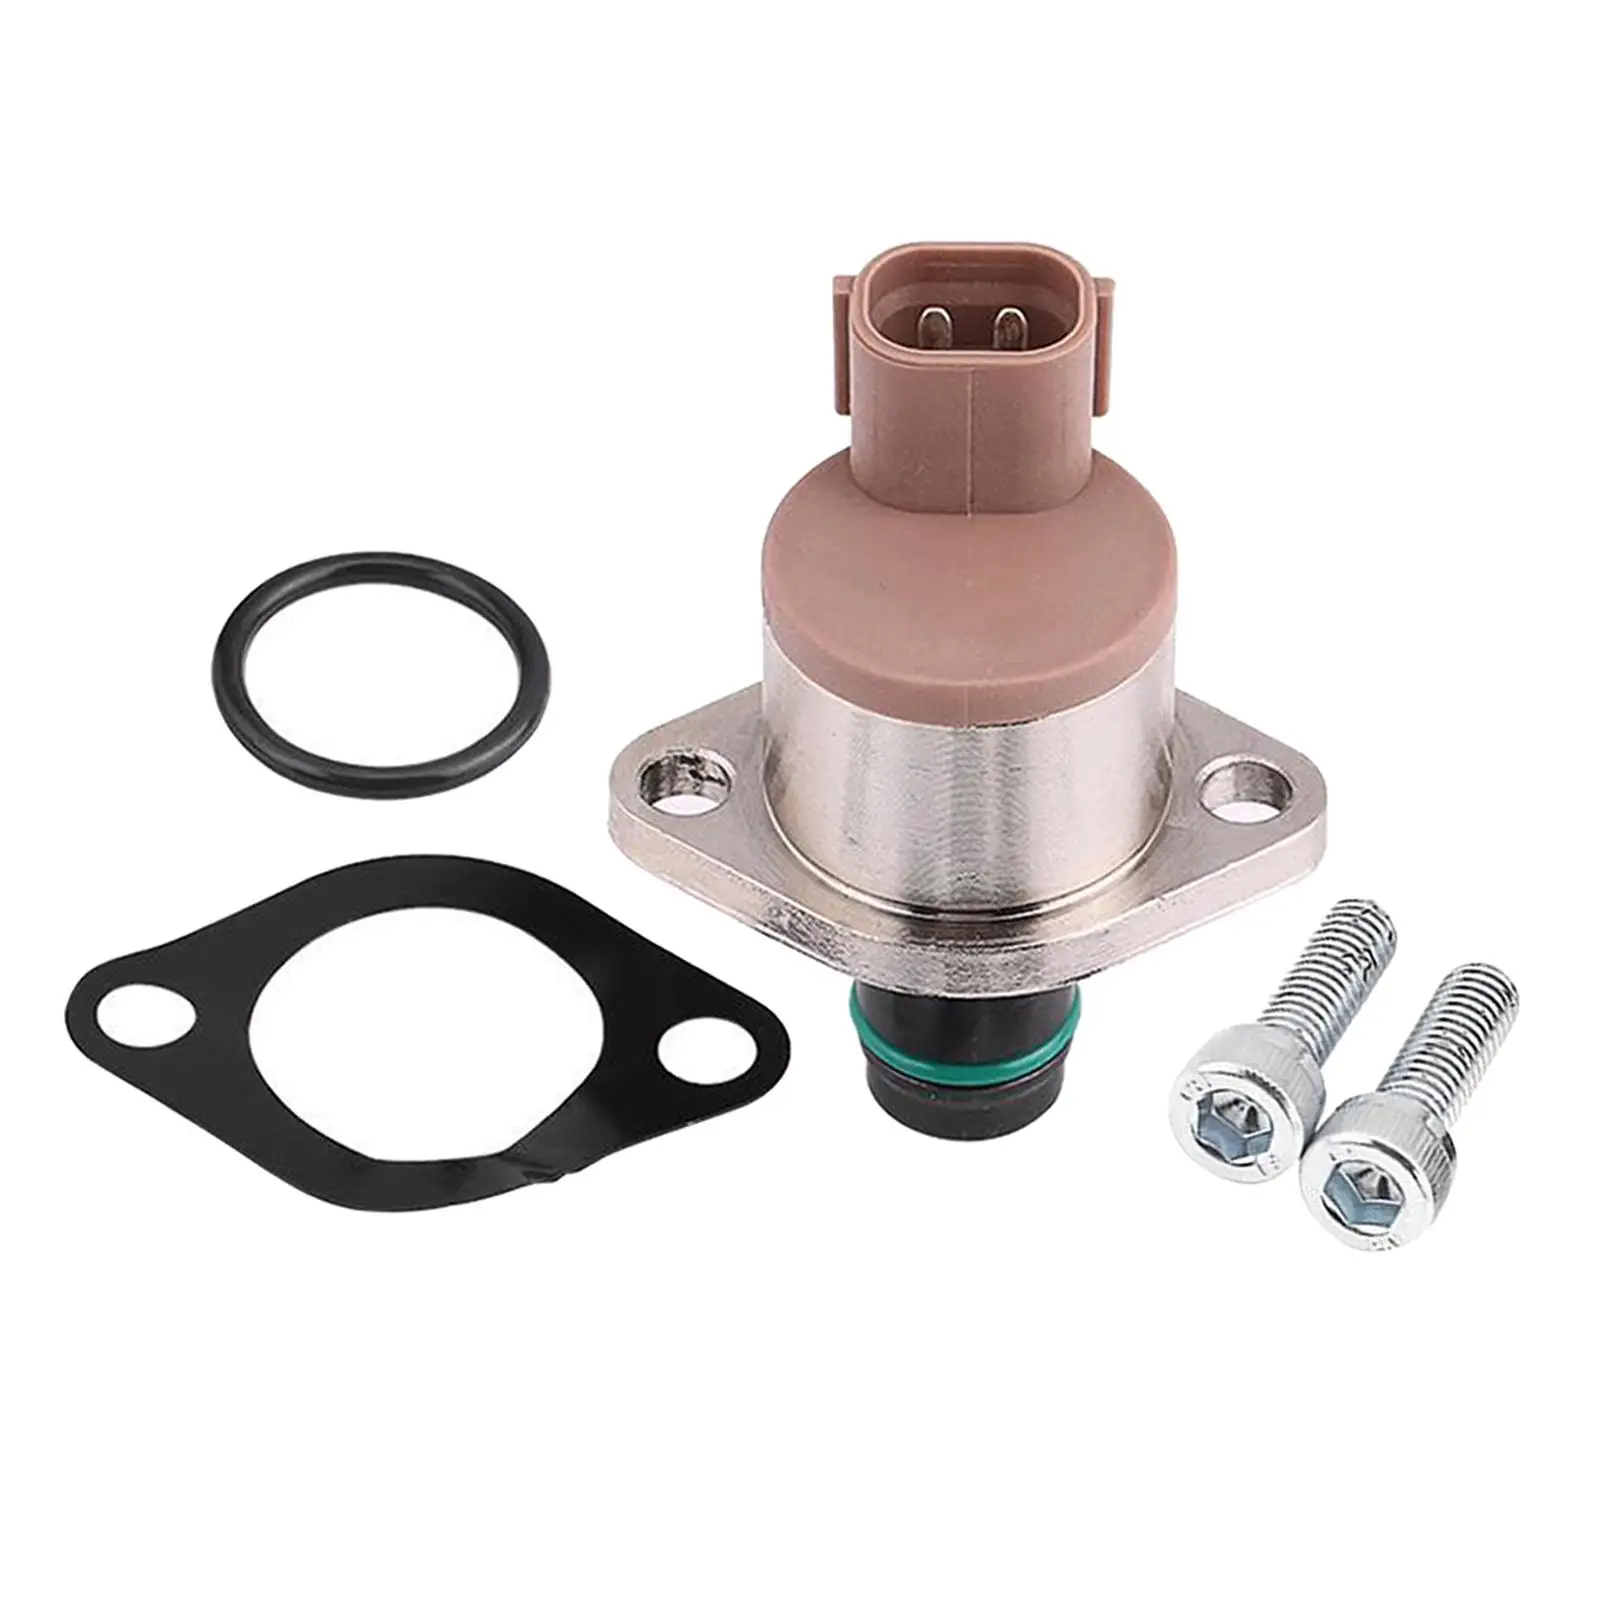 Fuel Suction Control Valve 294009-0260 294000-1011 98114311 294200-0160 Scv Kit  for 